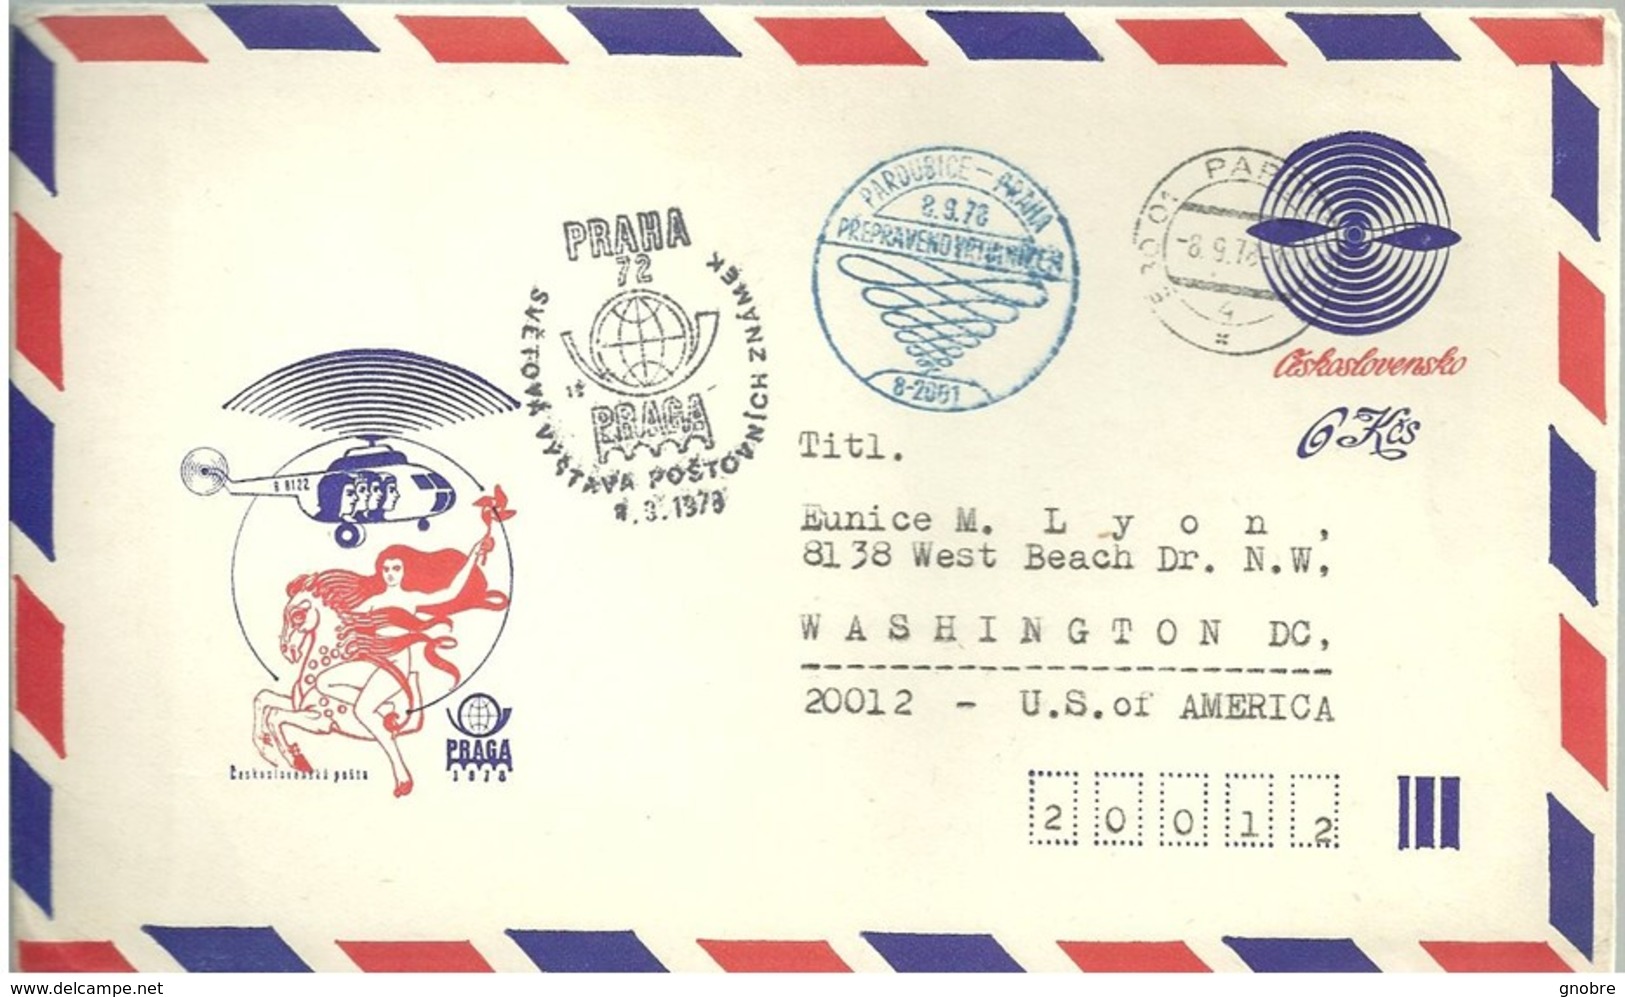 CZECHOSLOVAKIA To USA Cover Prepaid Stationery Sent In 1978 - Great Cancel - Woman Helicopter (GN 0278) - Covers